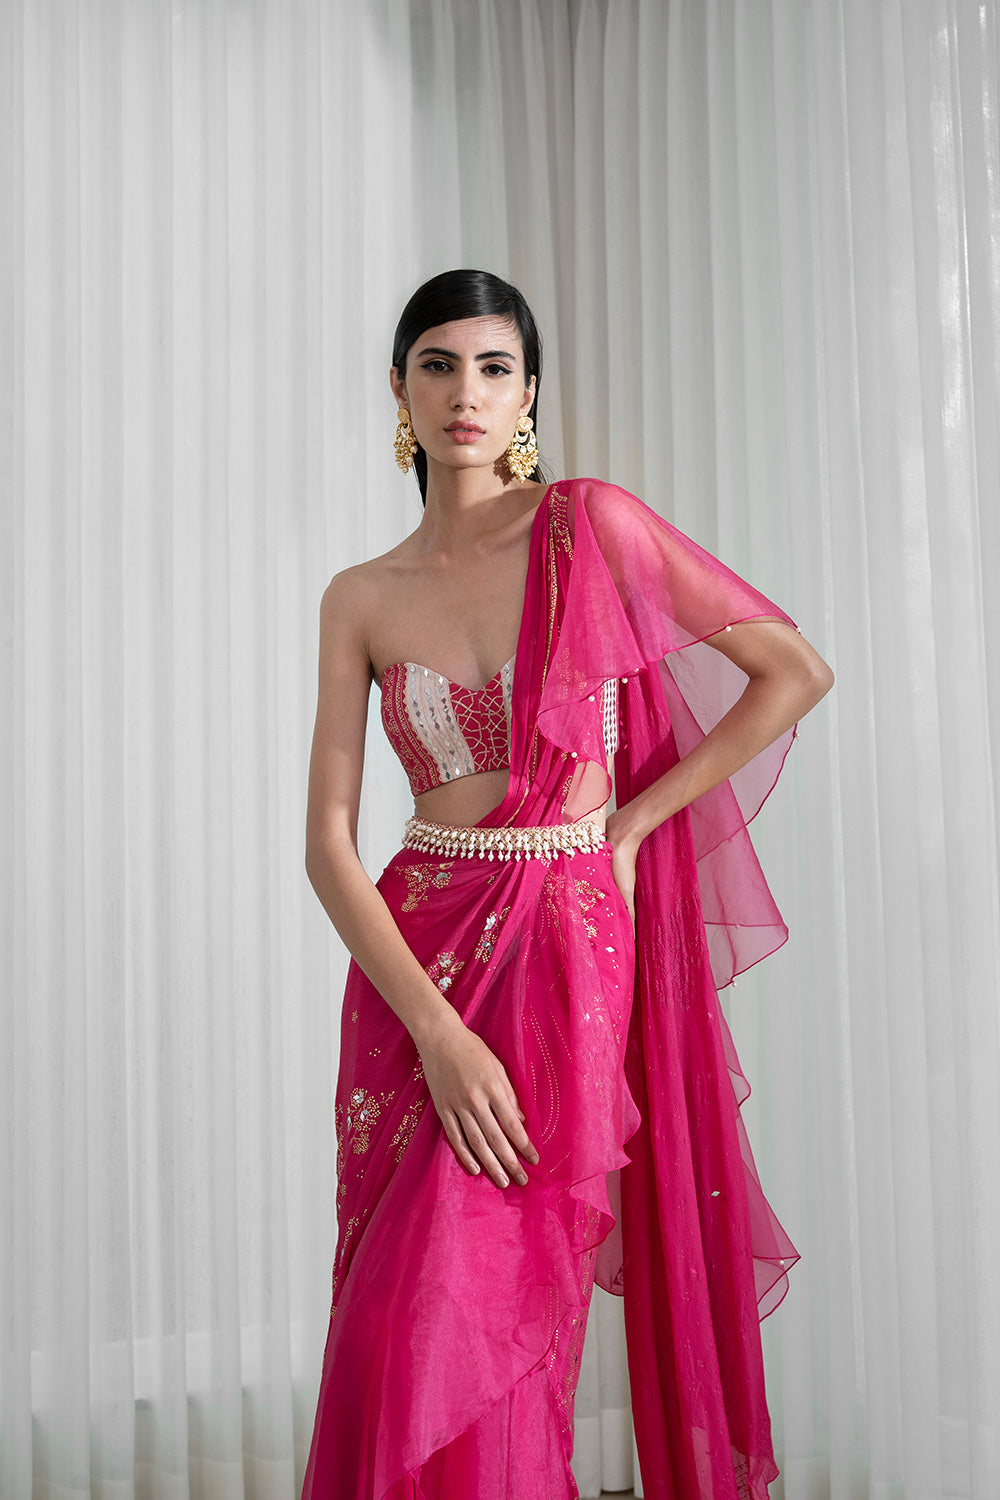 Foil Printed Draped Saree Styles With Bustier And Belt